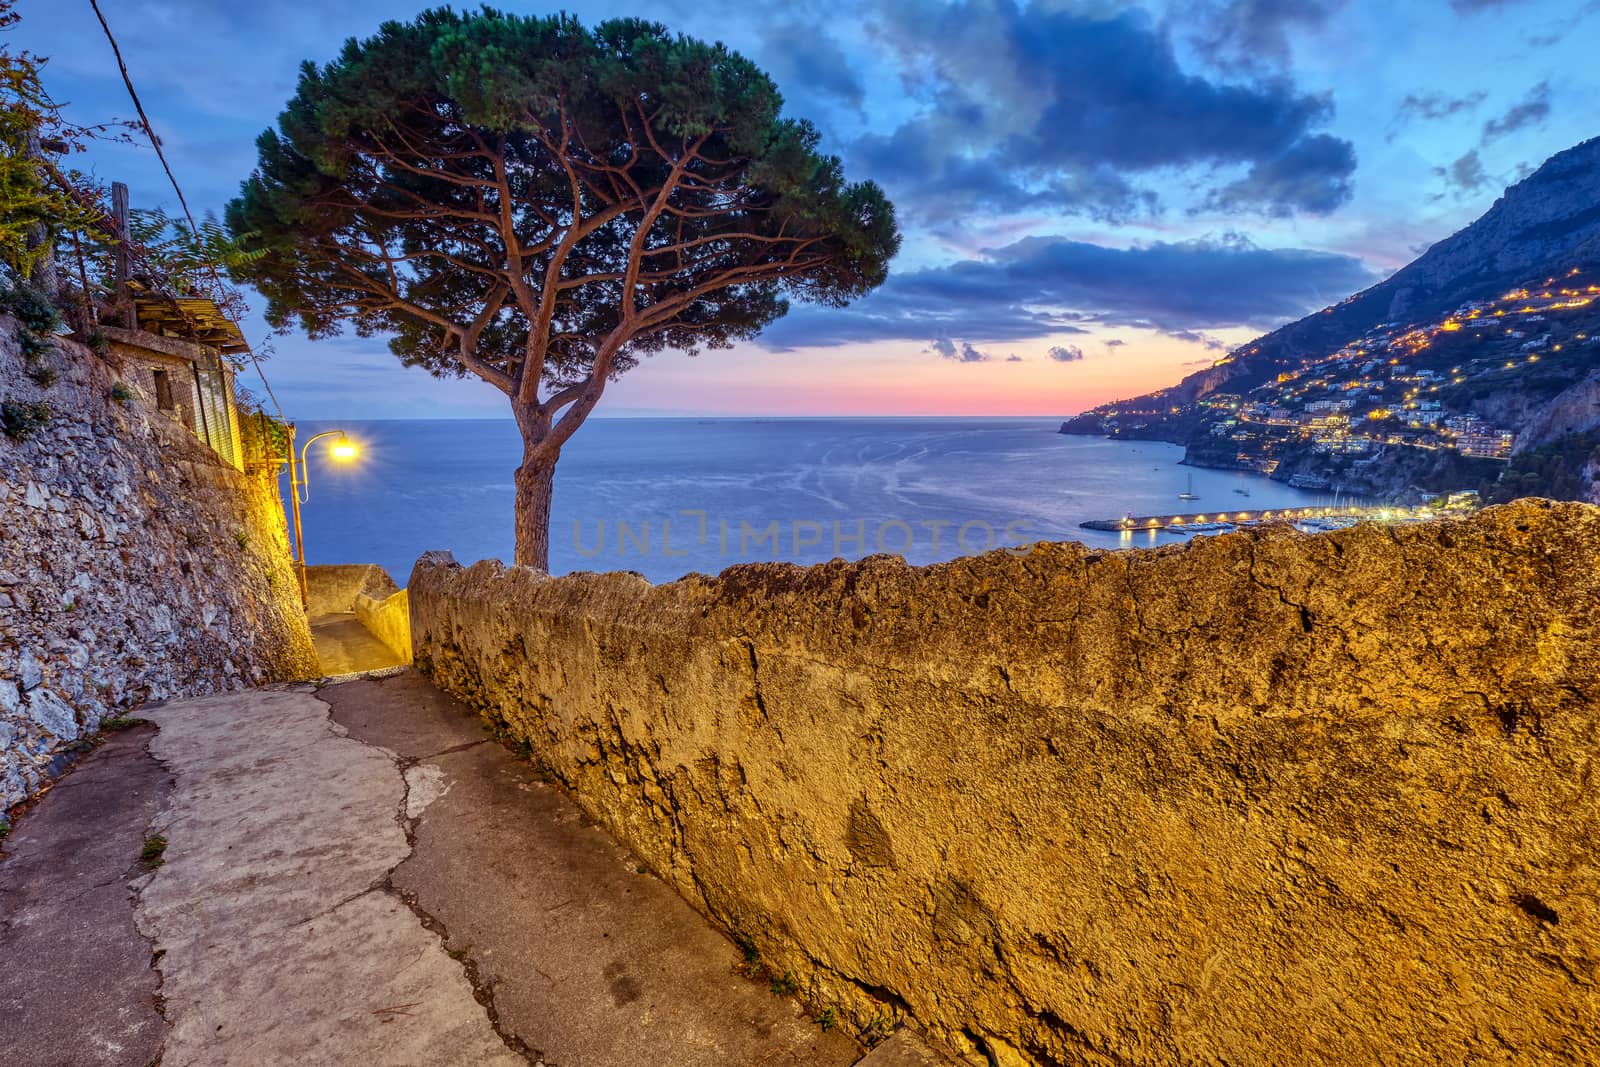 Small alleyway with a pine tree in Amalfi, Italy, at sunset